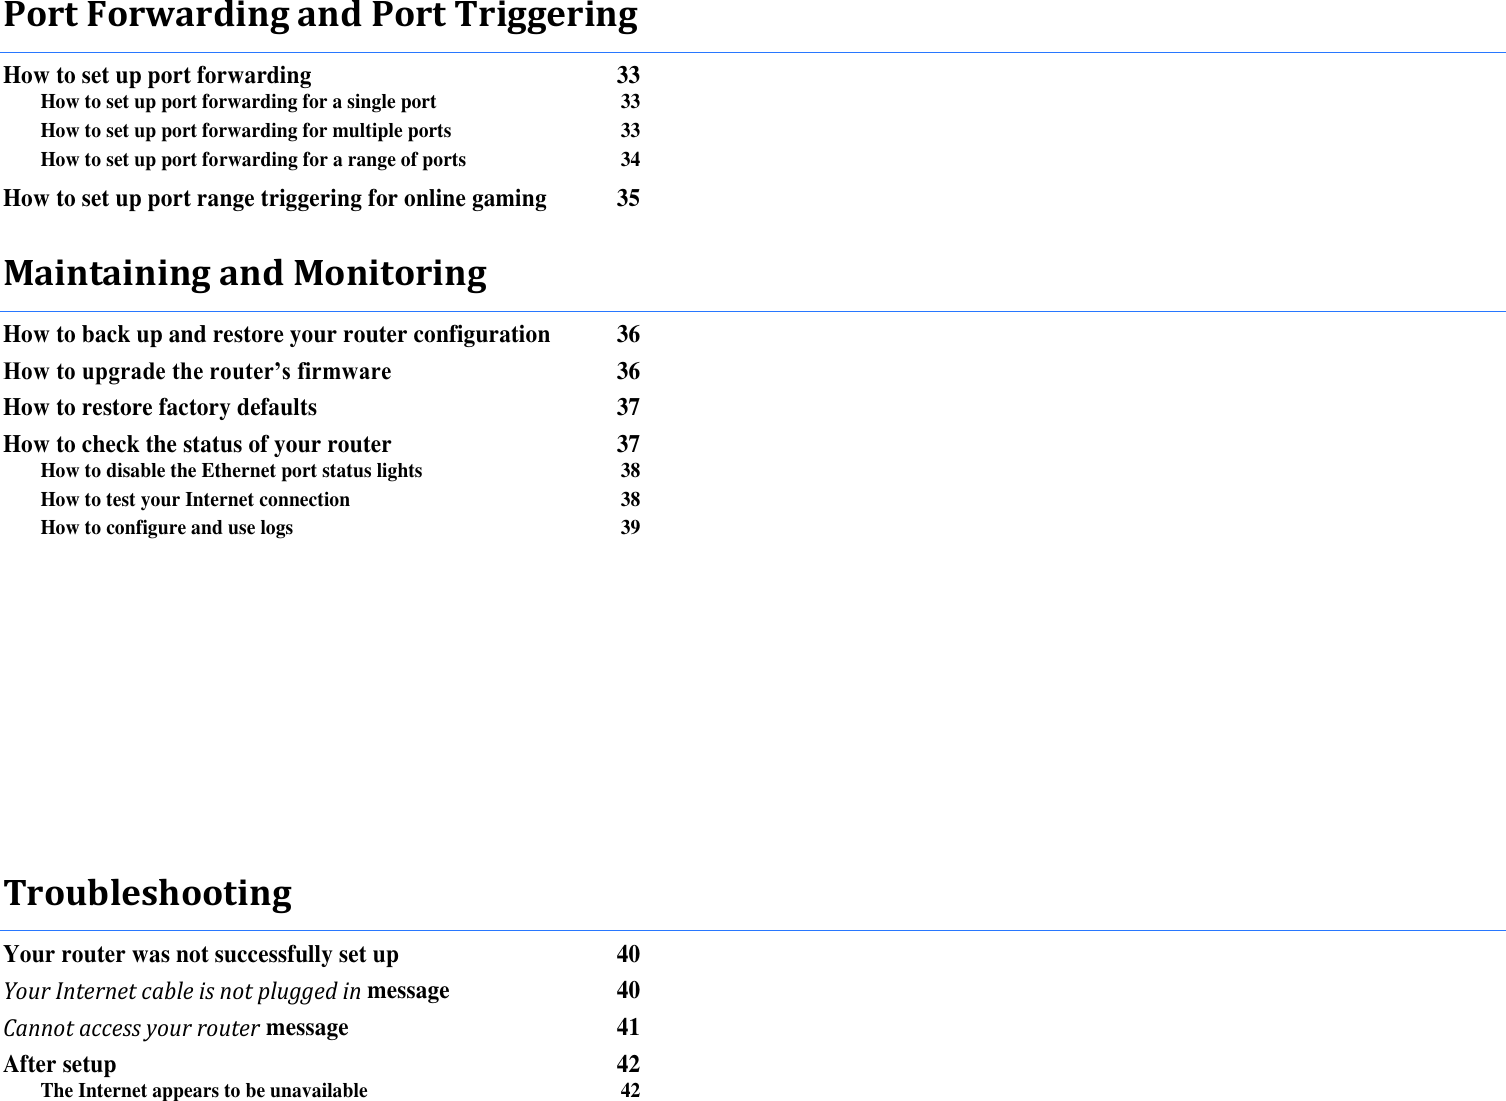 Port Forwarding and Port Triggering How to set up port forwarding  33 How to set up port forwarding for a single port  33 How to set up port forwarding for multiple ports  33 How to set up port forwarding for a range of ports  34 How to set up port range triggering for online gaming  35 Maintaining and Monitoring How to back up and restore your router configuration  36 How to upgrade the router’s firmware 36 How to restore factory defaults  37 How to check the status of your router  37 How to disable the Ethernet port status lights  38 How to test your Internet connection  38 How to configure and use logs  39           Troubleshooting Your router was not successfully set up  40 Your Internet cable is not plugged in message  40 Cannot access your router message  41 After setup  42 The Internet appears to be unavailable  42 